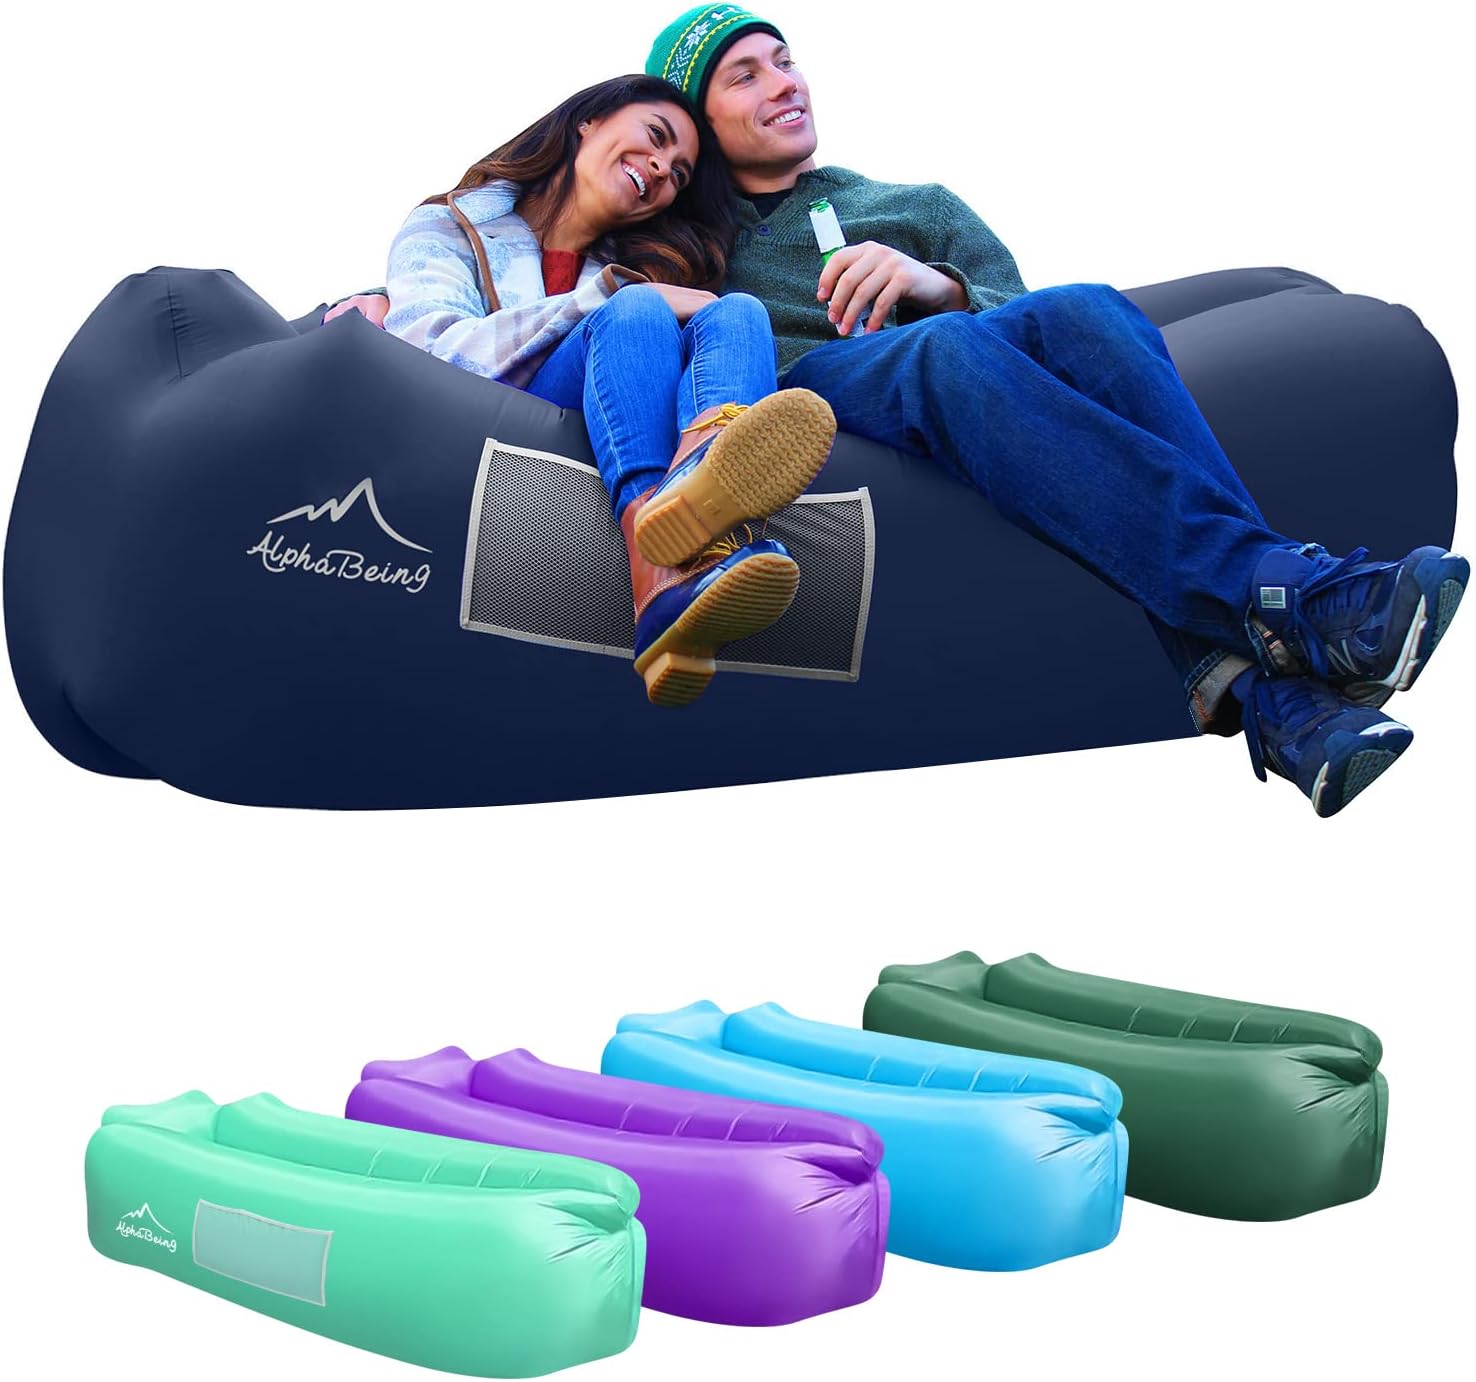 AlphaBeing Inflatable Lounger - Best Air Lounger Sofa for Camping, Hiking - Ideal Inflatable Couch for Camping and Festivals - Perfect Inflatable Beach Chair for Adults